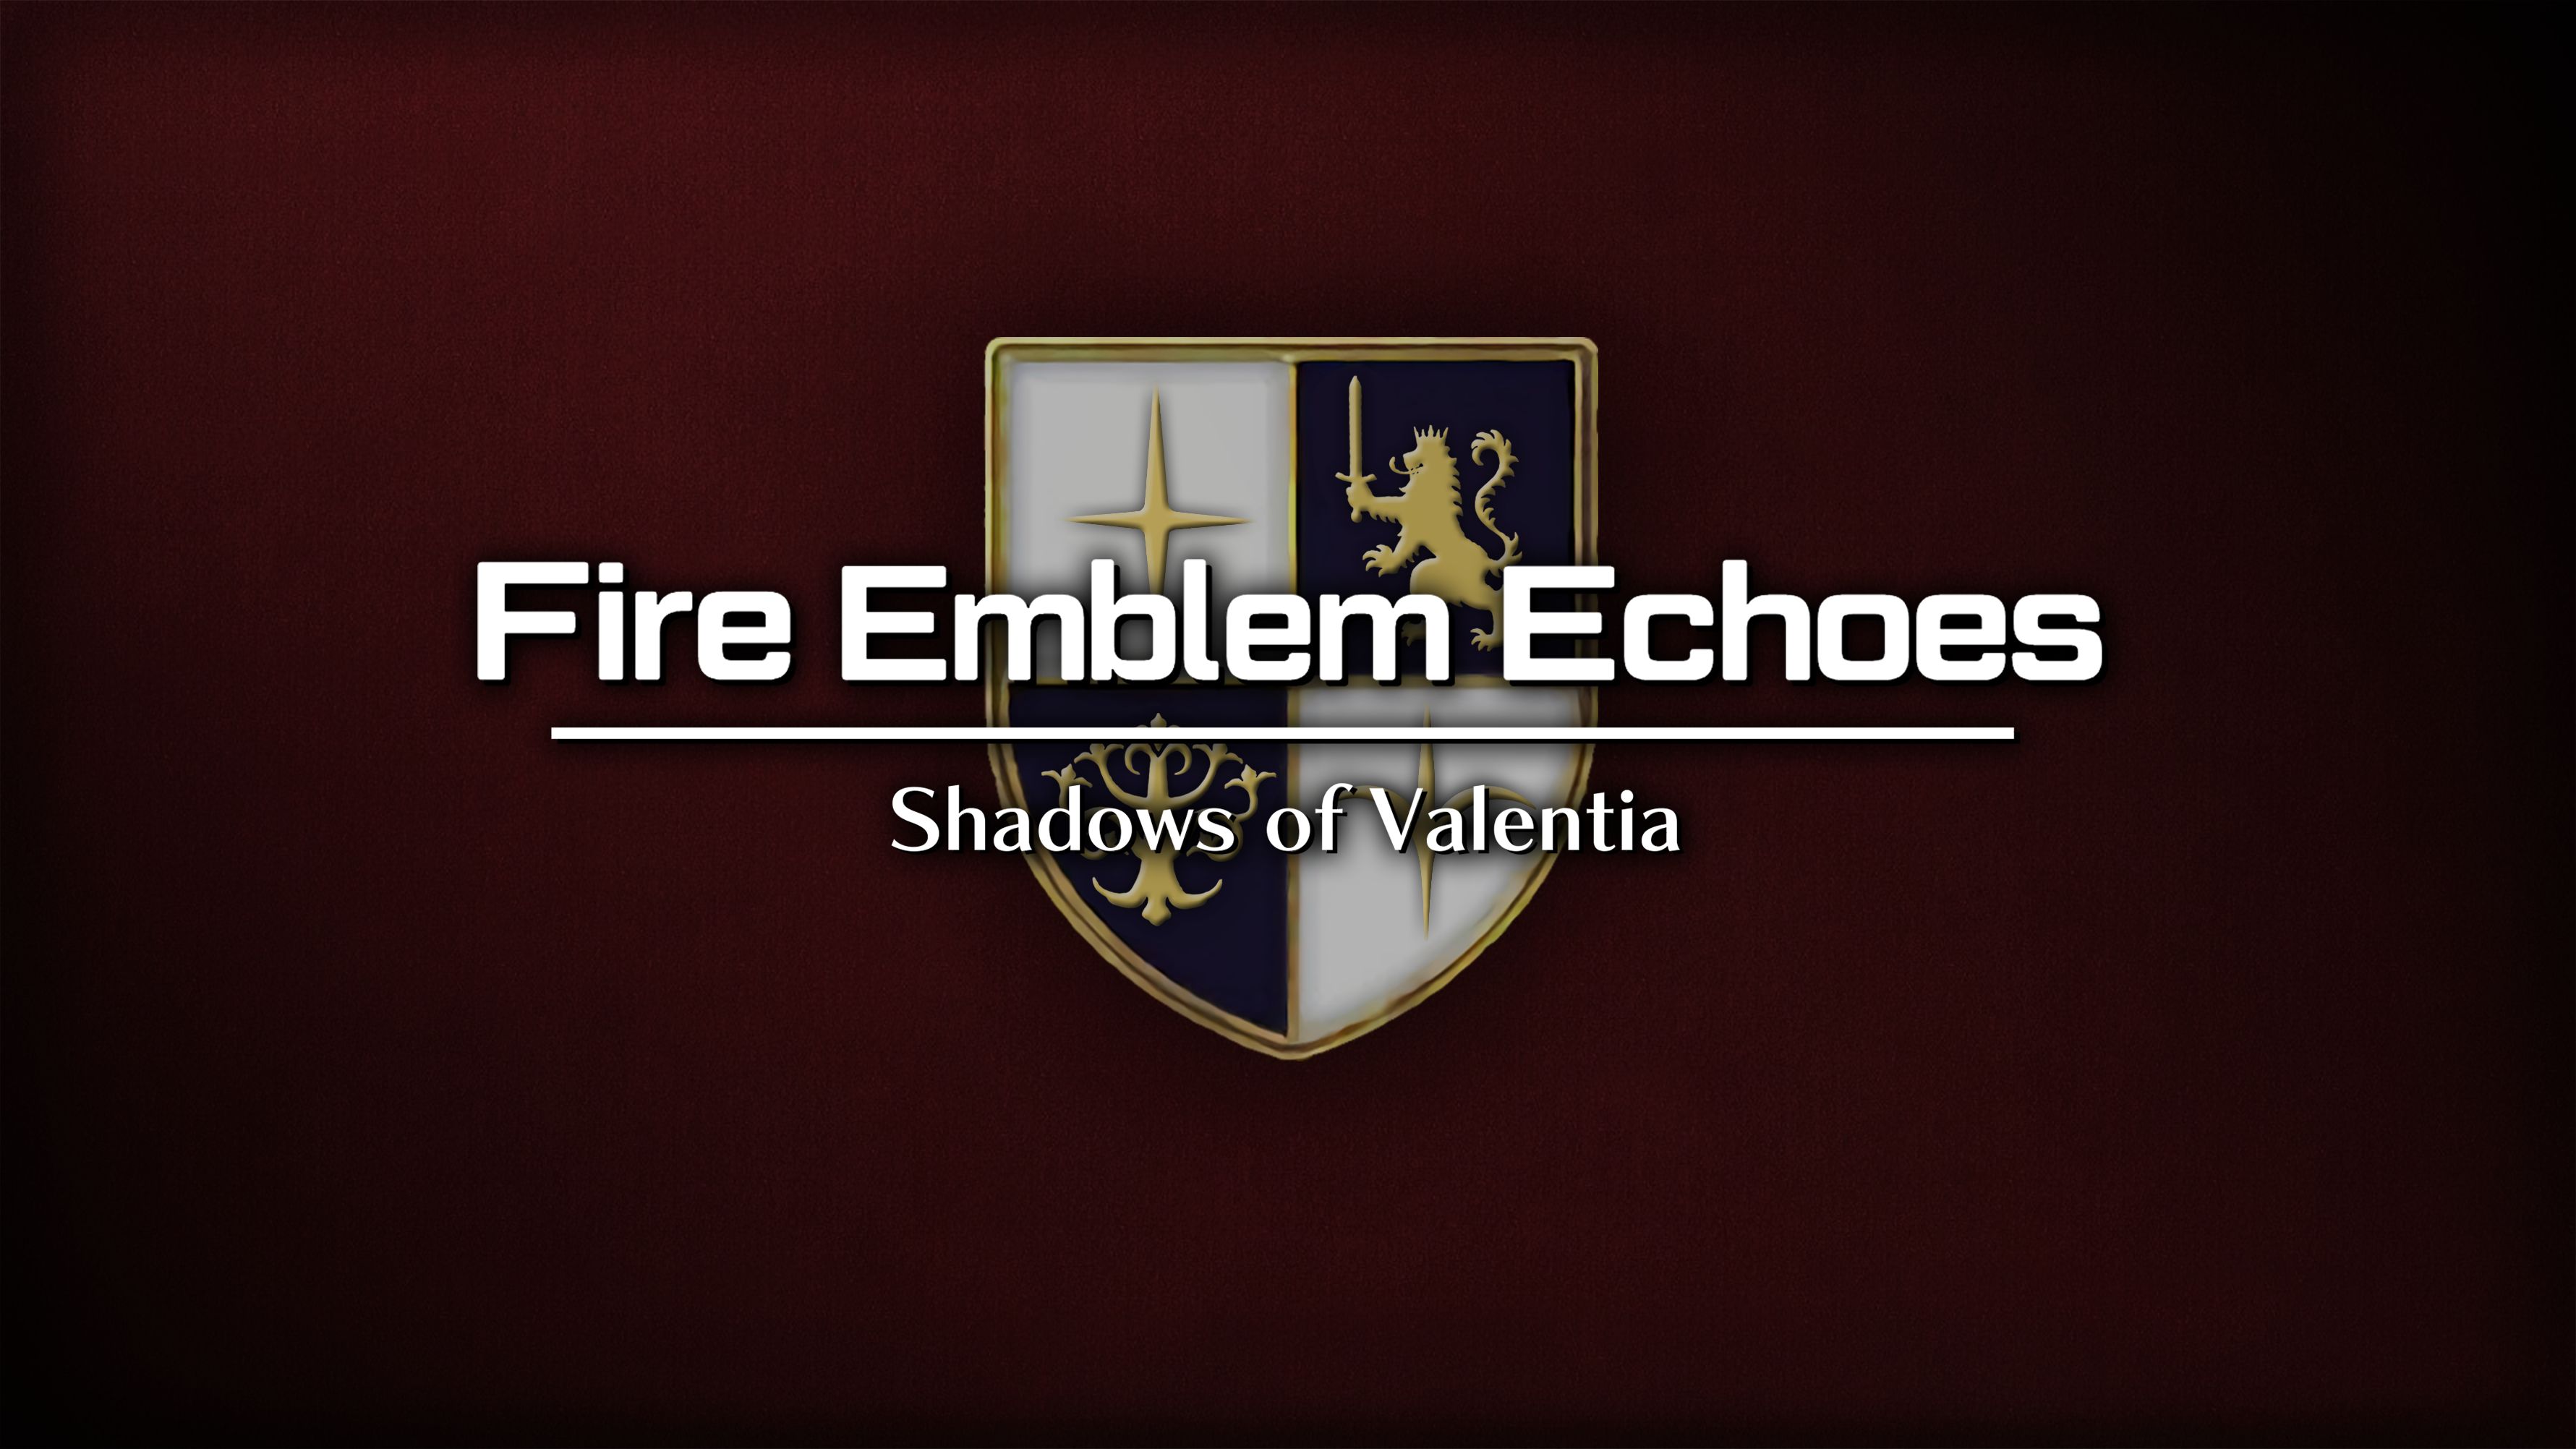 fire emblem echoes: shadows of valentia, video game